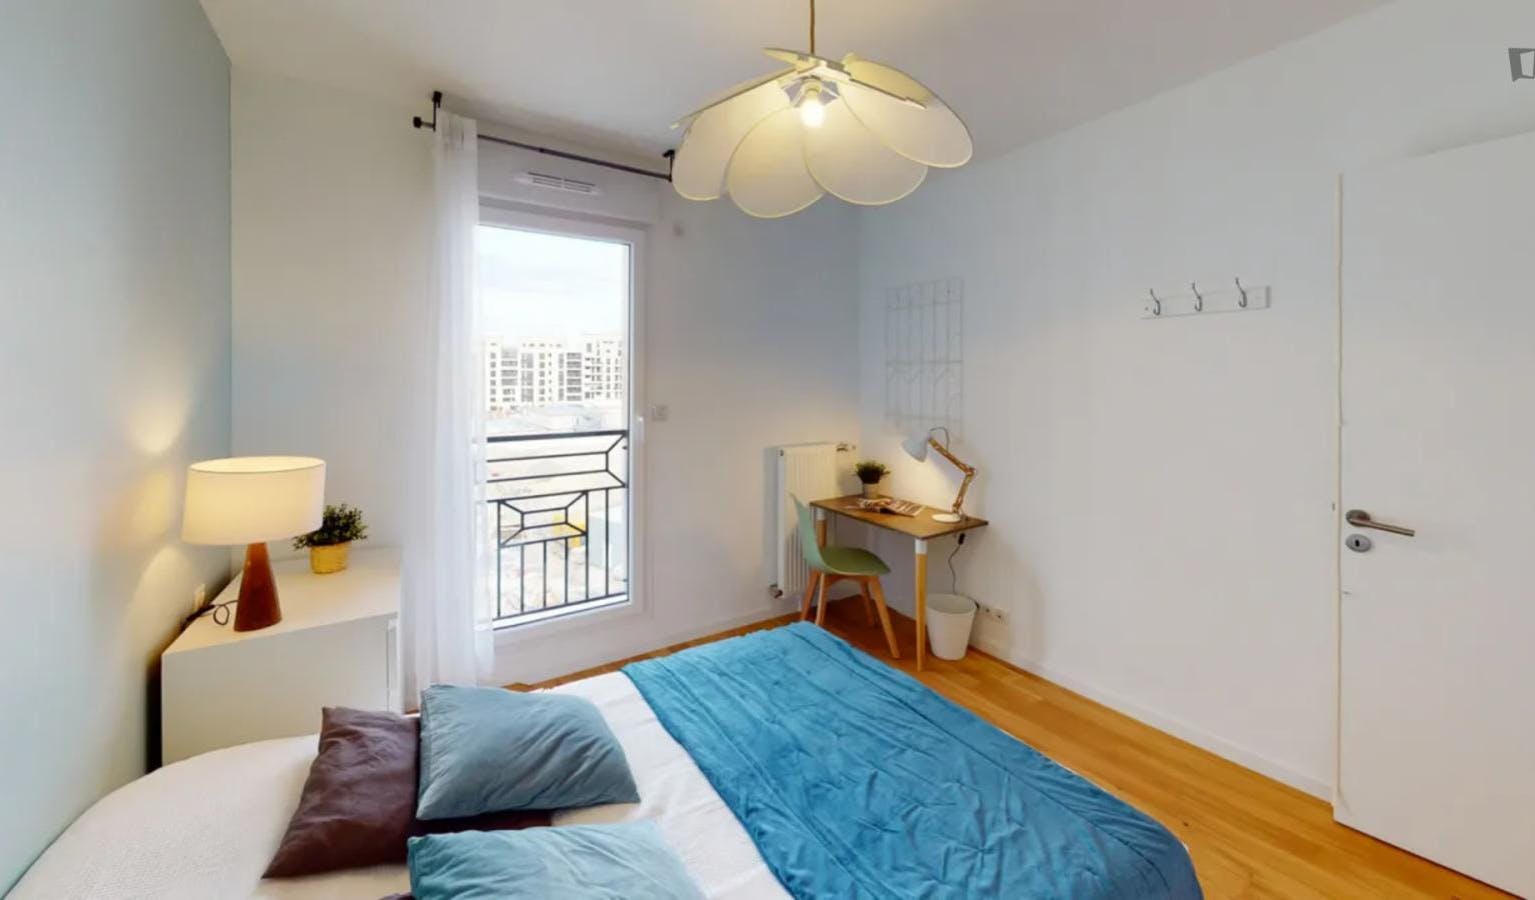 Charming double bedroom in a 4-bedroom apartment in Saint-Ouen-sur-Seine